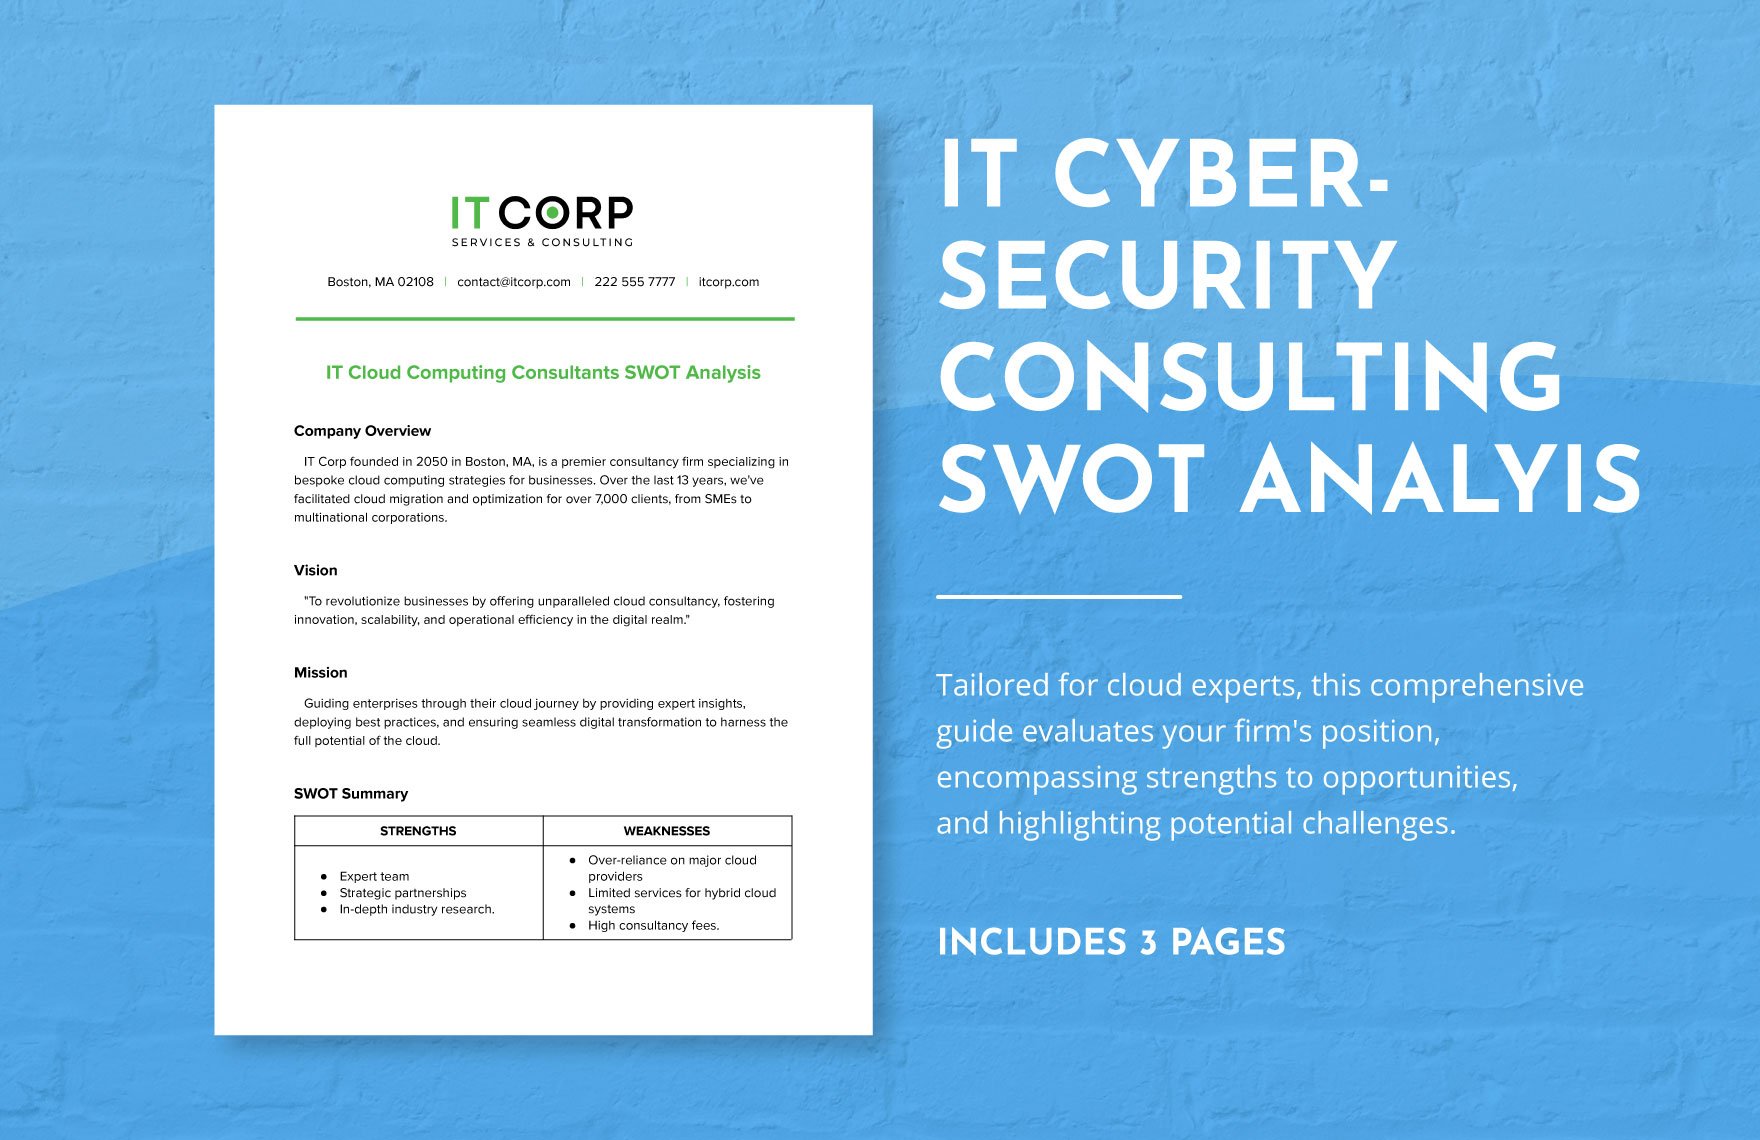 IT Cloud Computing Consultants SWOT Analysis Template in Word, Google Docs, PDF